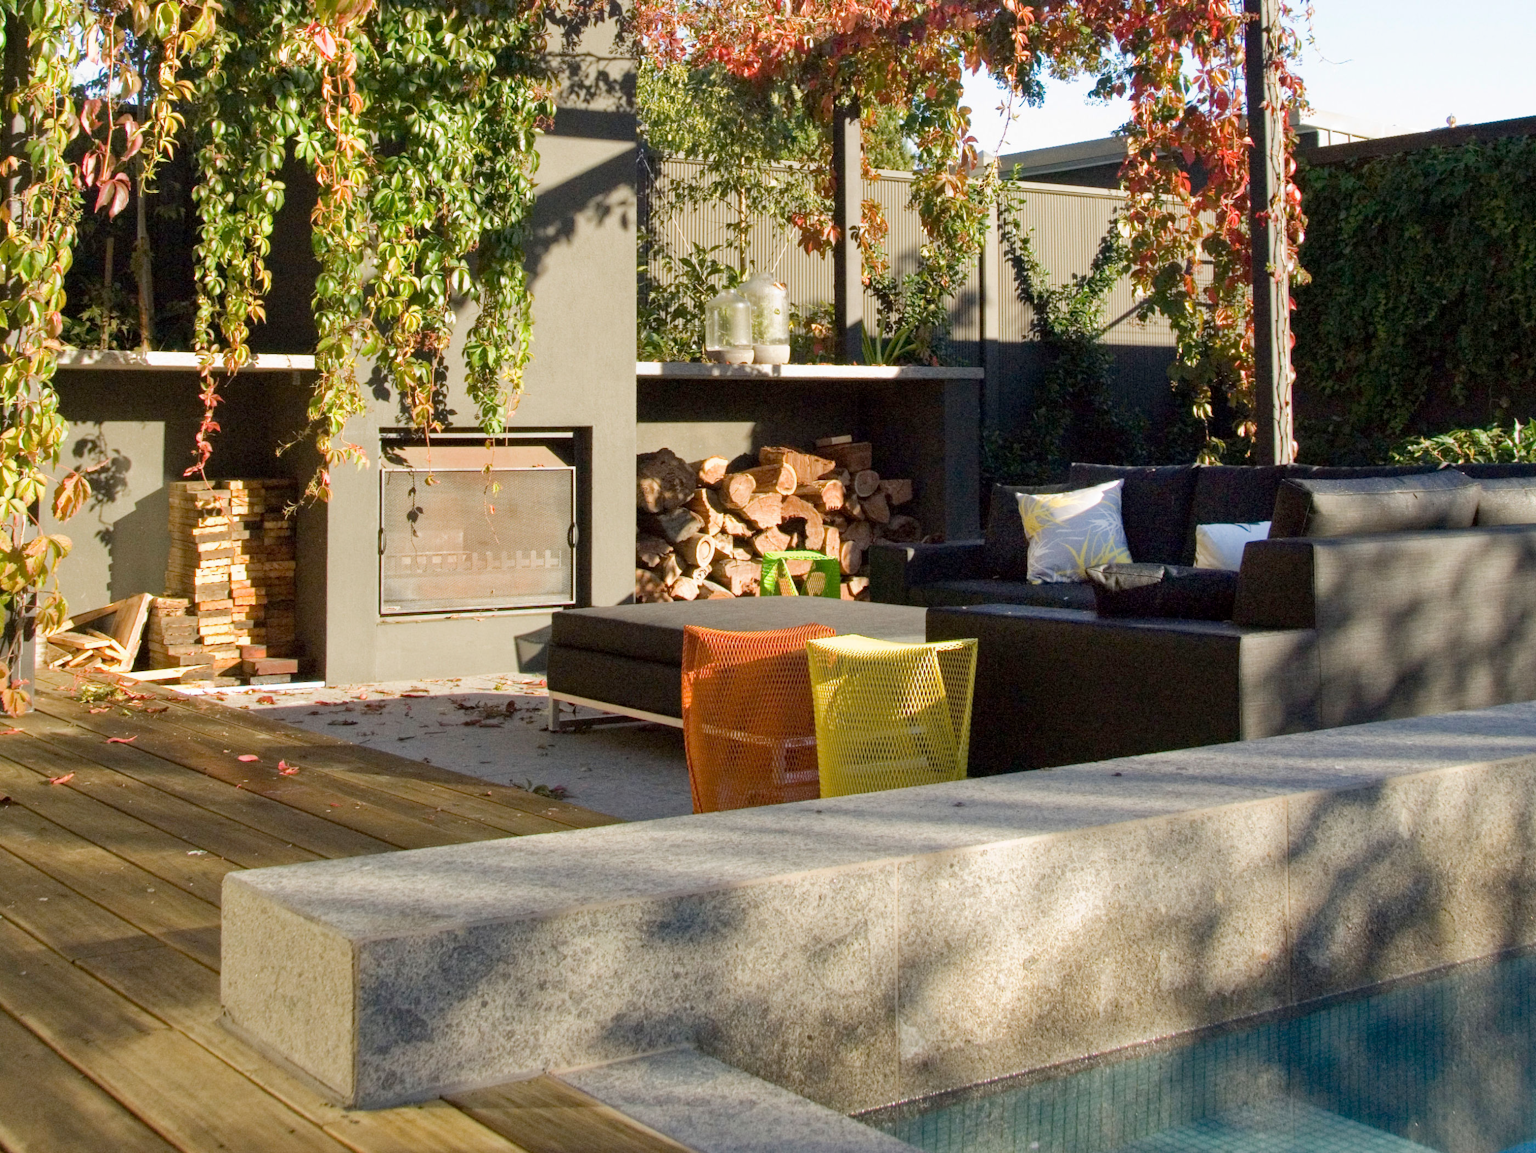 Torino bluestone pool coping with lounge setting and fireplace in background